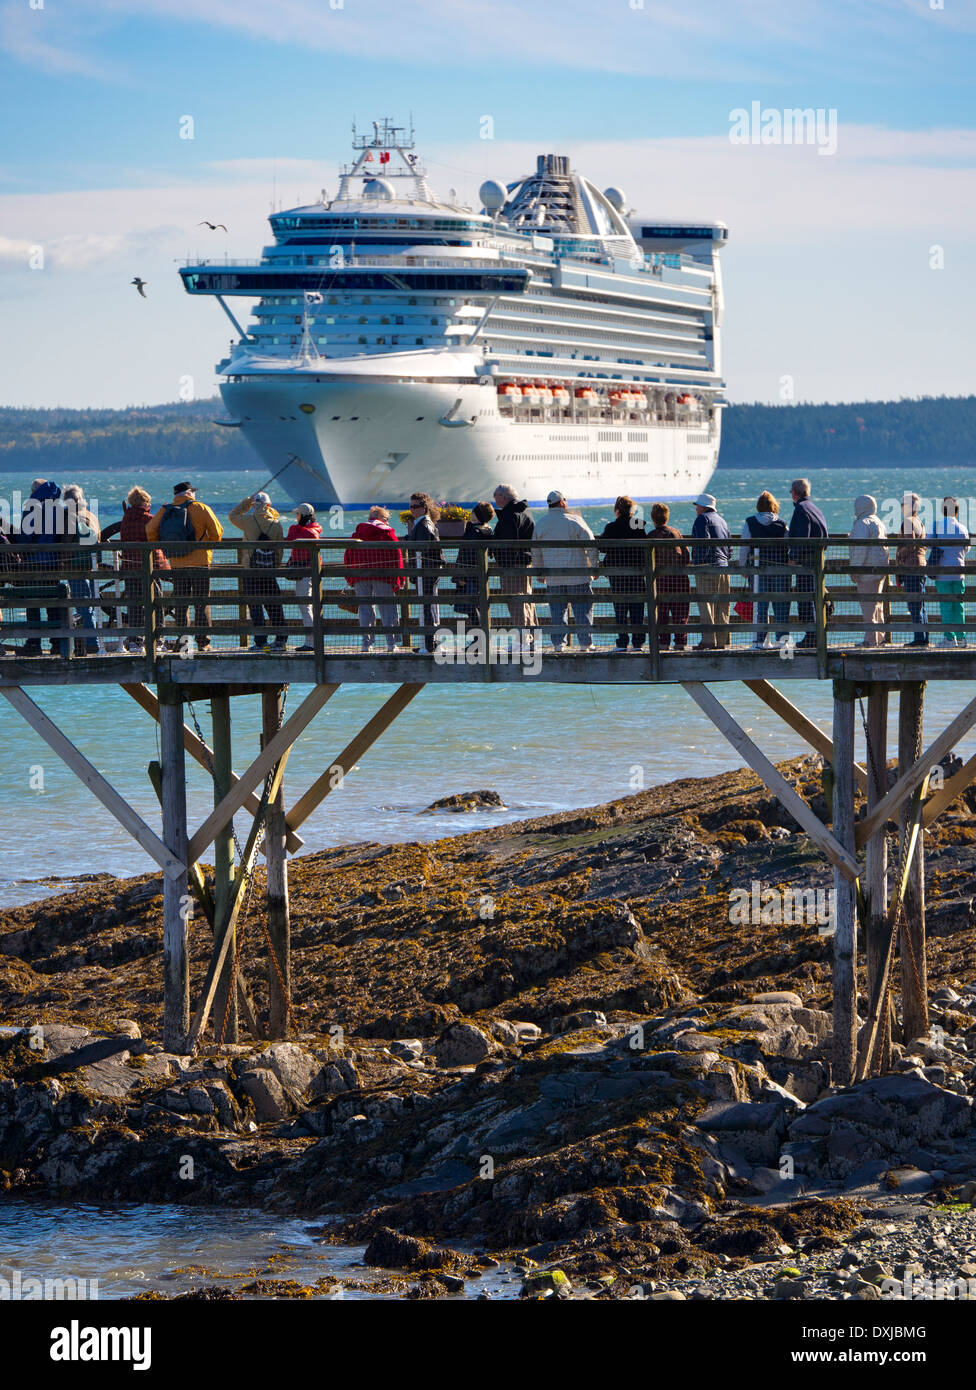 Cruise Liner Caribbean Princess moored off Bar Harbour Maine USA 8 Stock Photo